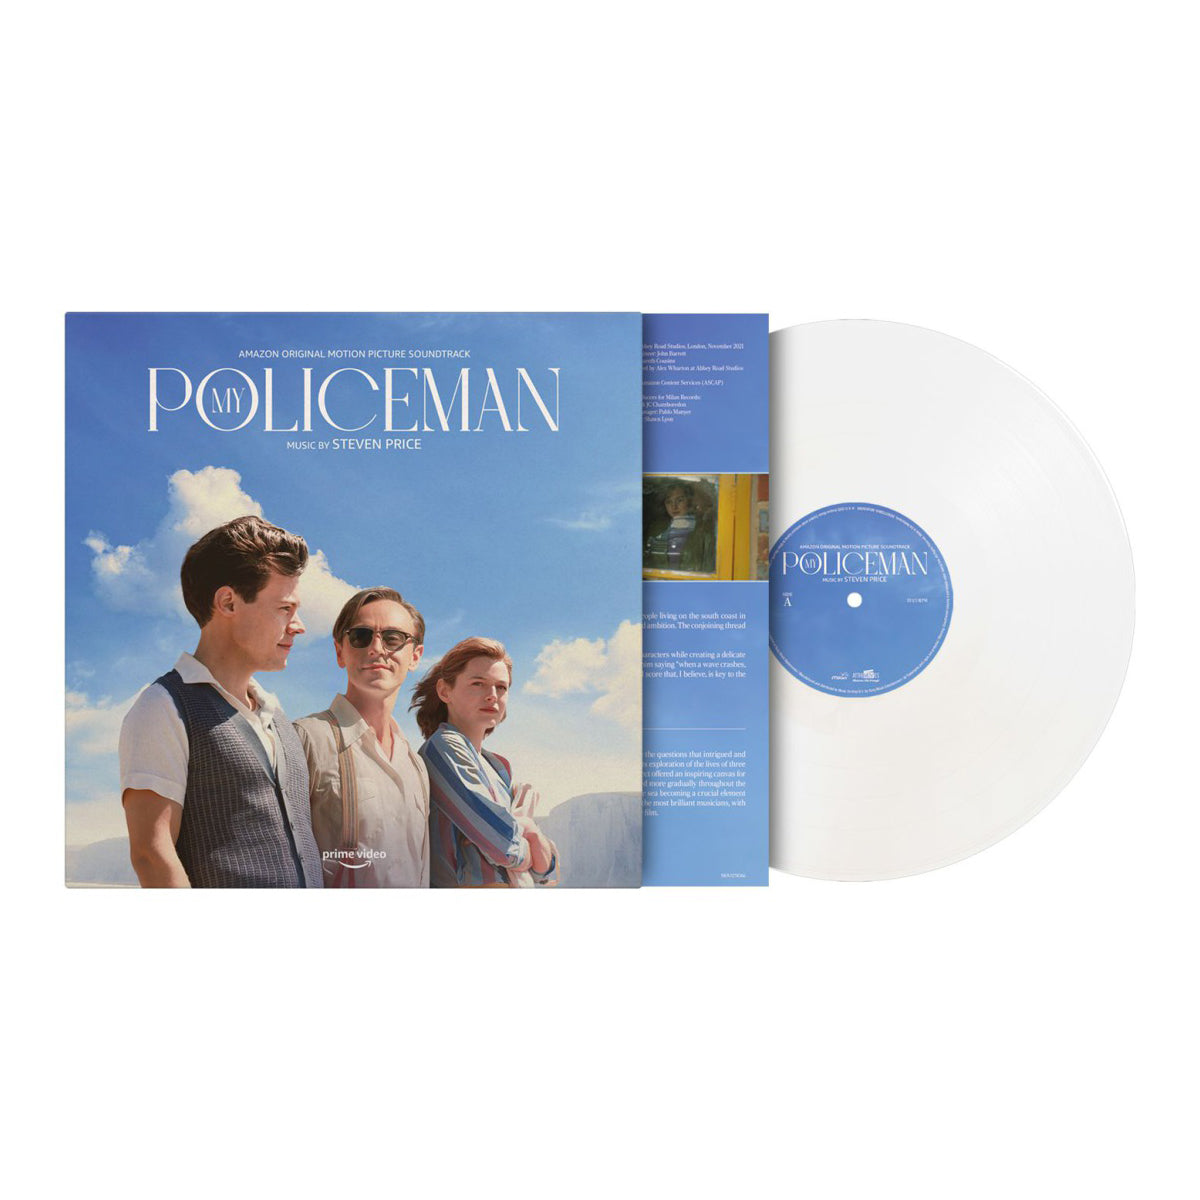 Original Soundtrack, Harry Styles - My Policeman: Limited Edition Crystal Clear Vinyl LP